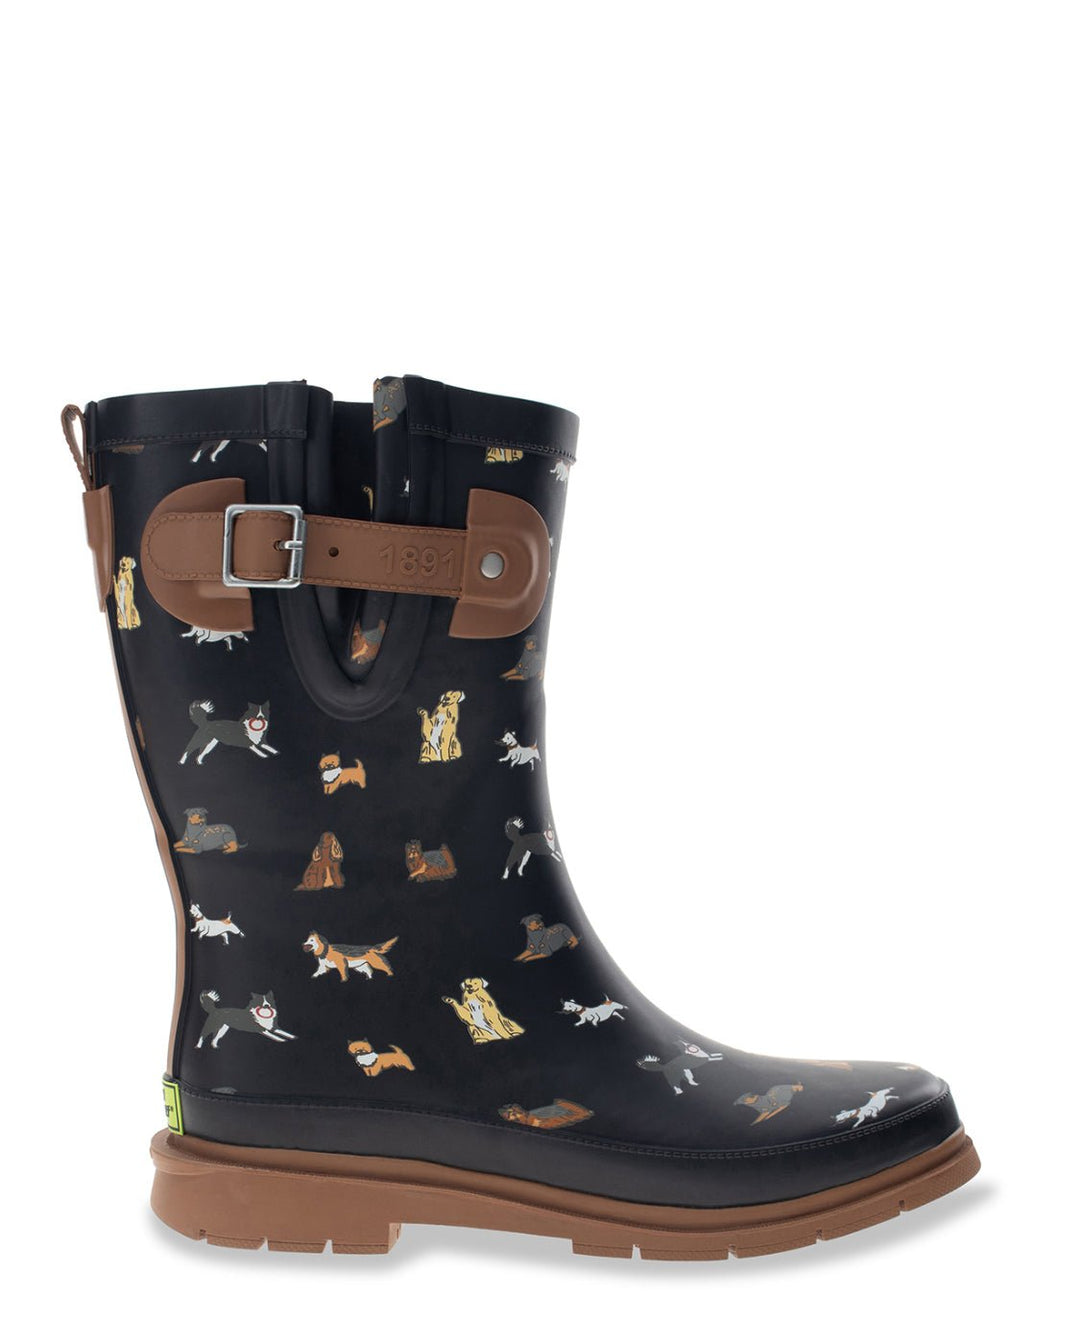 Women's Puppies and Pooches Mid Rain Boot - Black - Western Chief